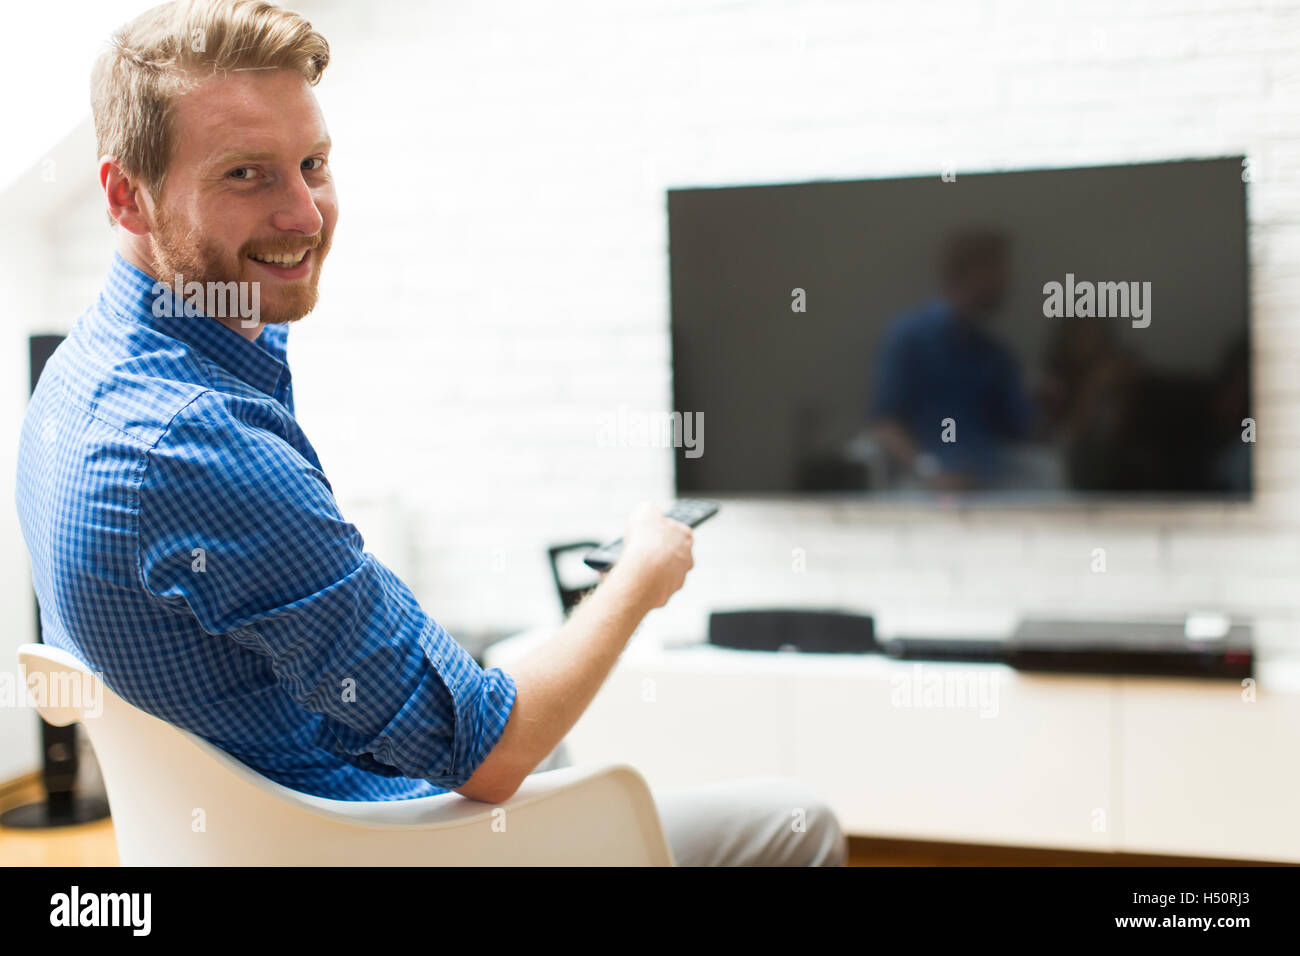 Man with a tv remote control sitting in a living room Stock Photo